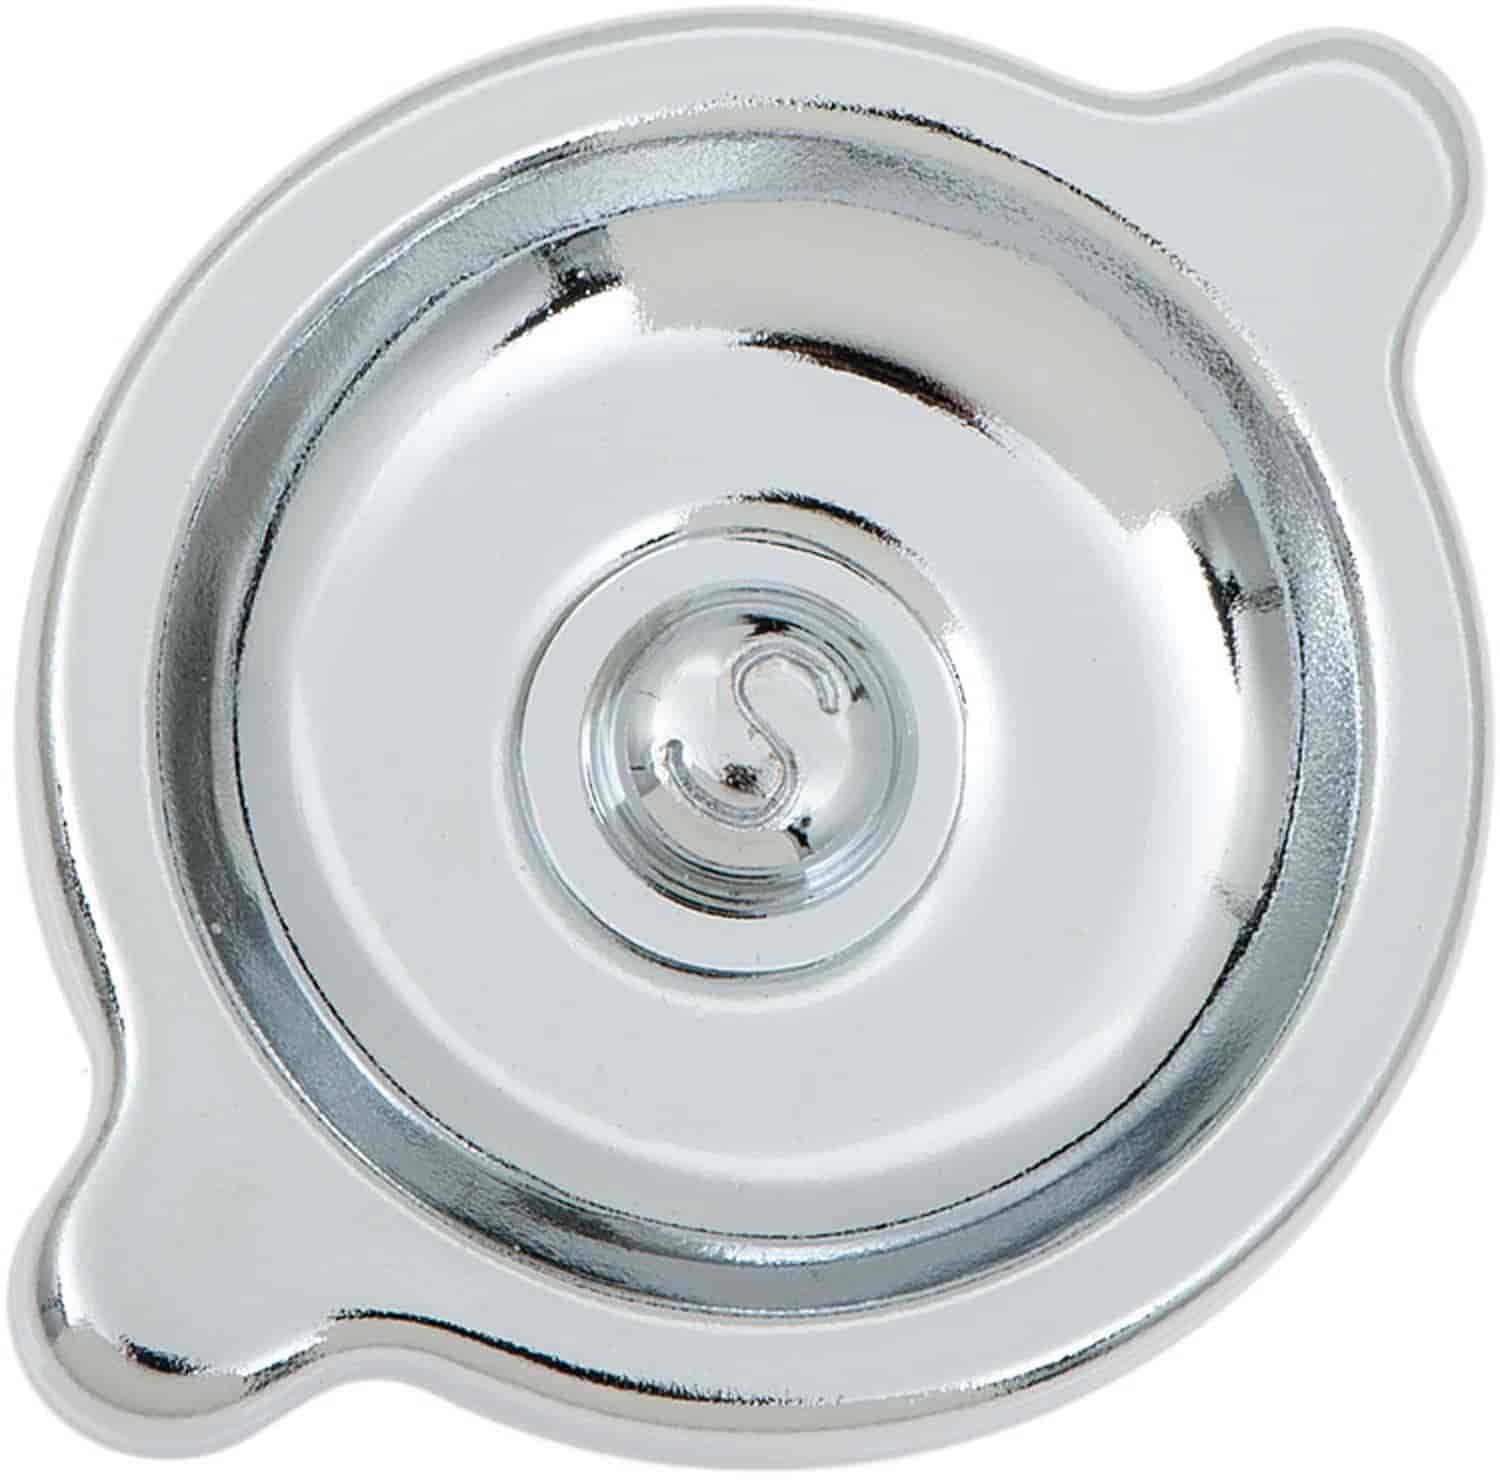 Oil Filler Cap 1964-1981 Chevy Cars and Trucks with V8 Engines